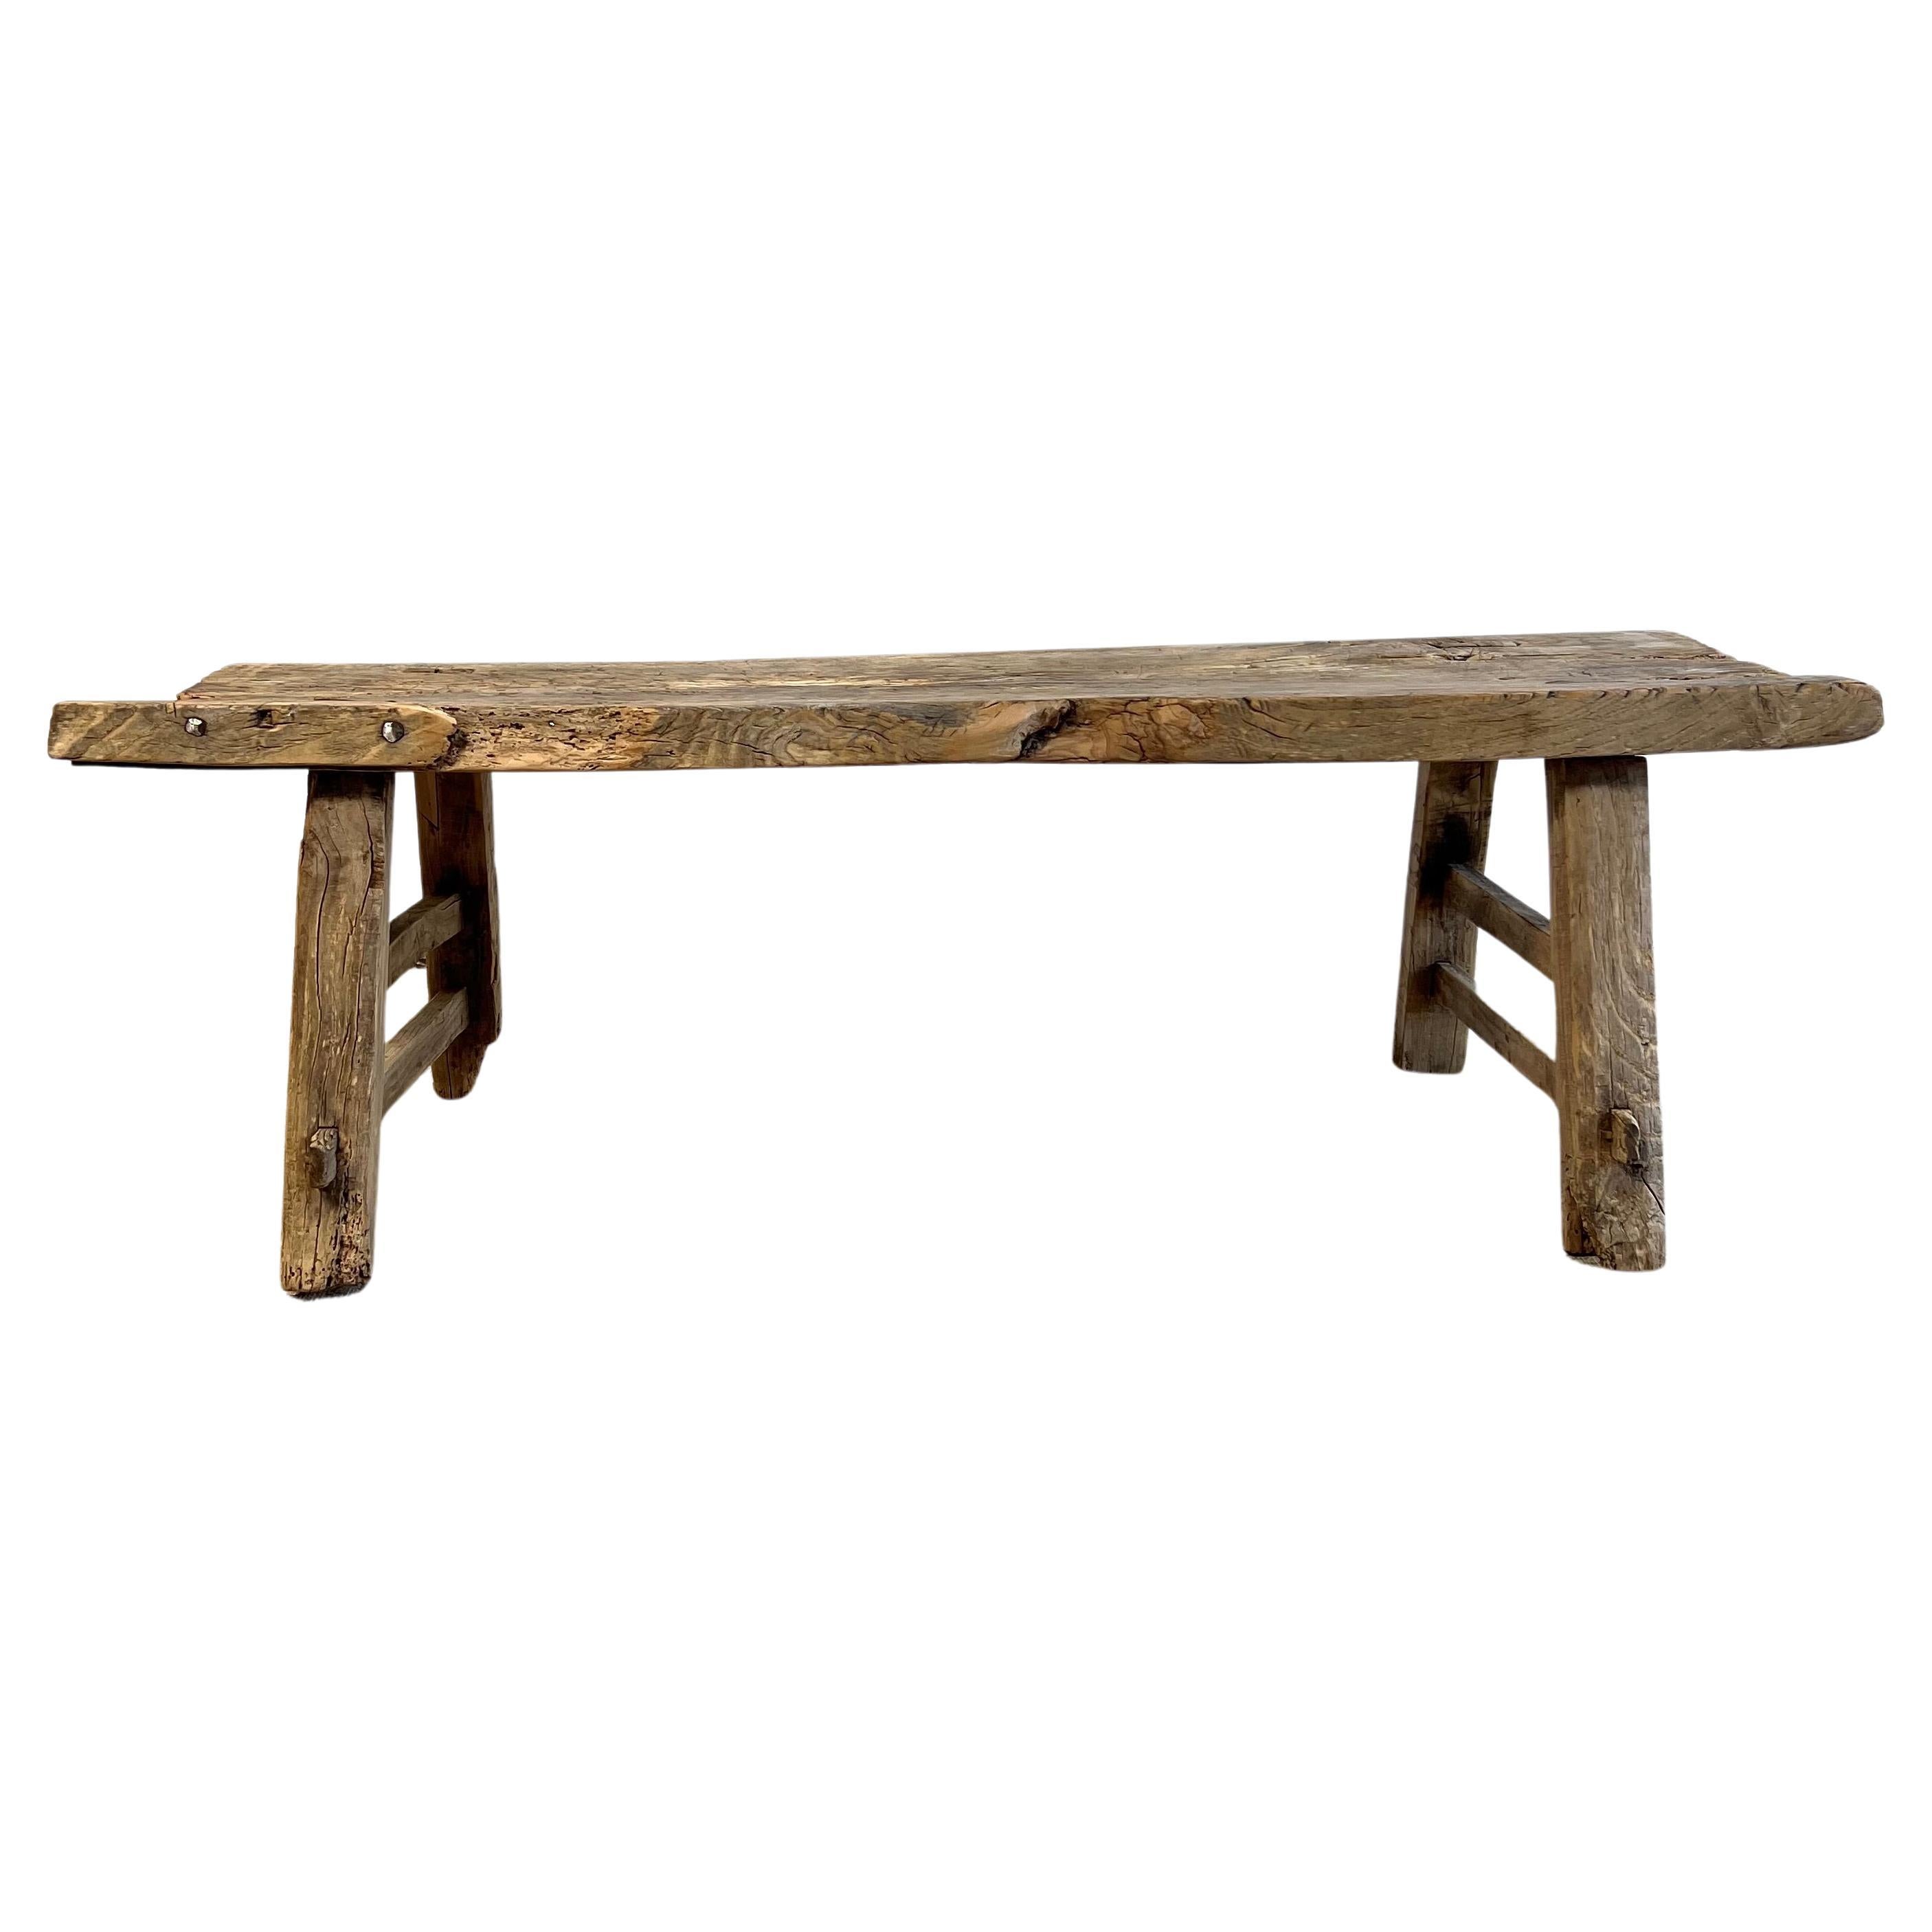 Antique Elm Wood Bench Coffee Table with Original Details